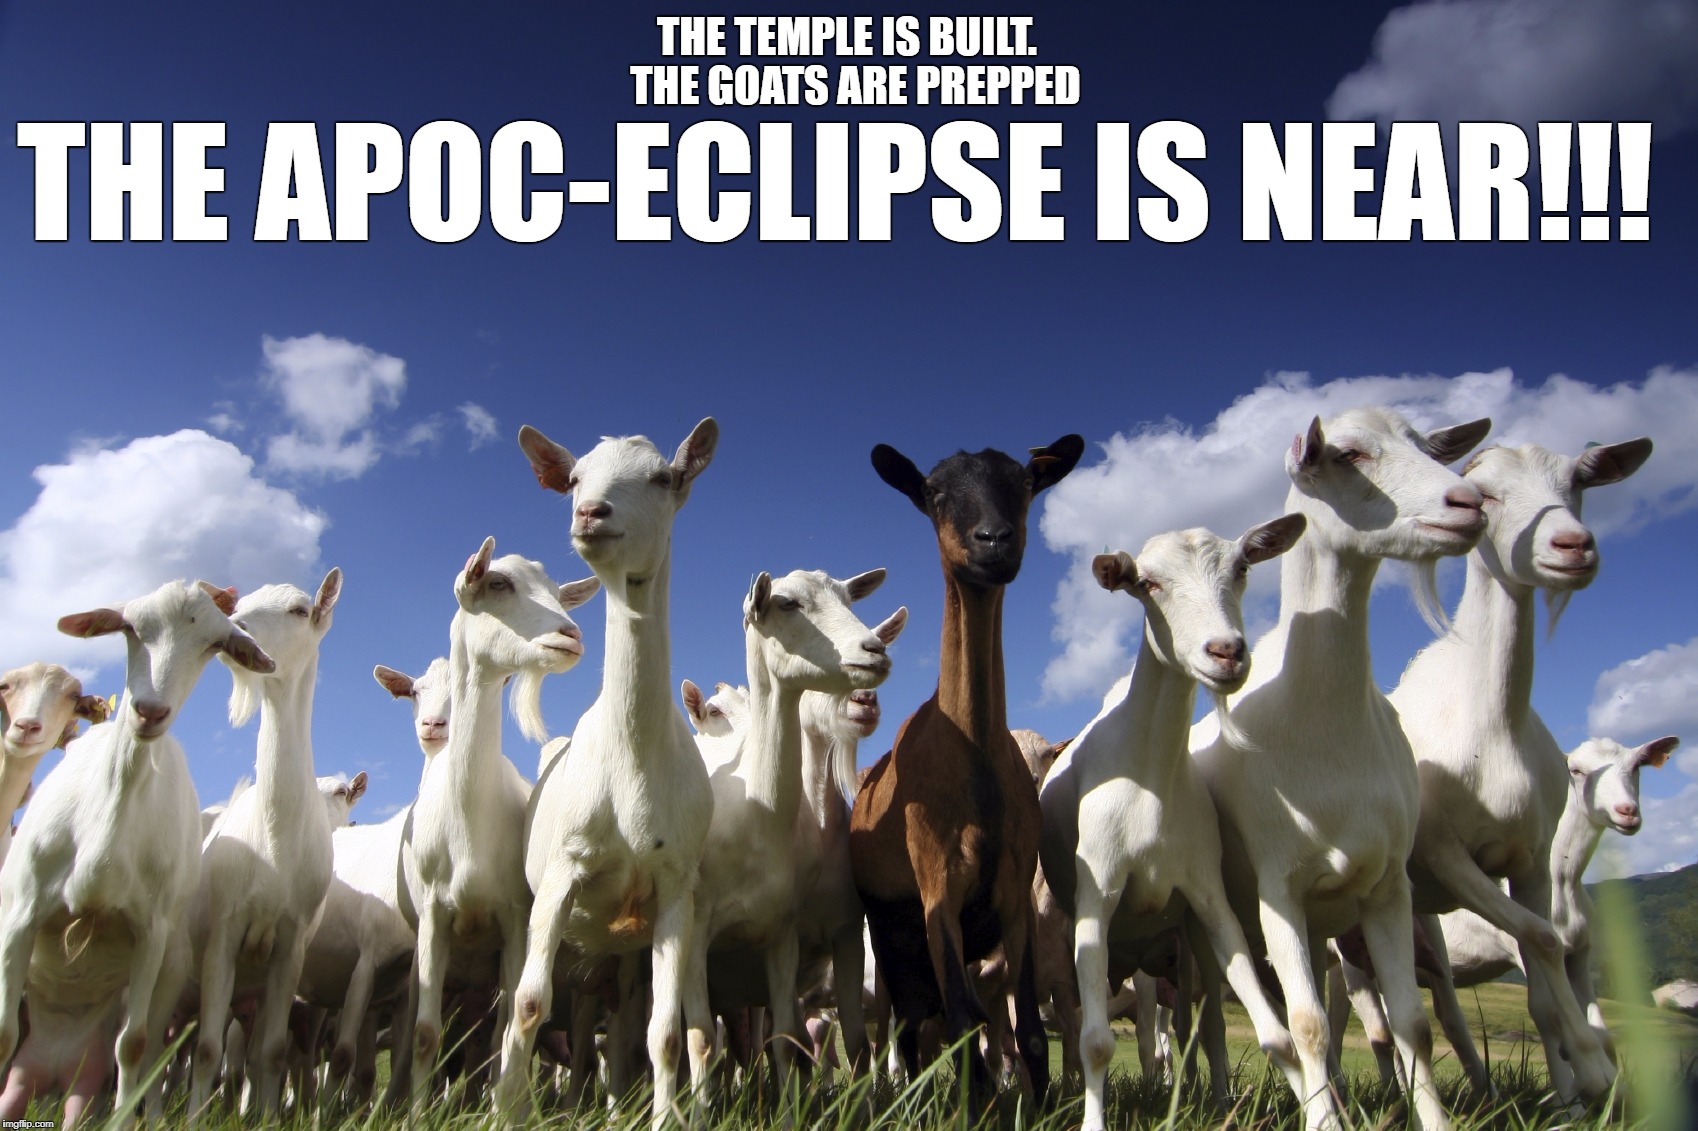 The ApocEclipse is Near!!! | THE TEMPLE IS BUILT. 
THE GOATS ARE PREPPED; THE APOC-ECLIPSE IS NEAR!!! | image tagged in goats,solar eclipse,eclipse | made w/ Imgflip meme maker